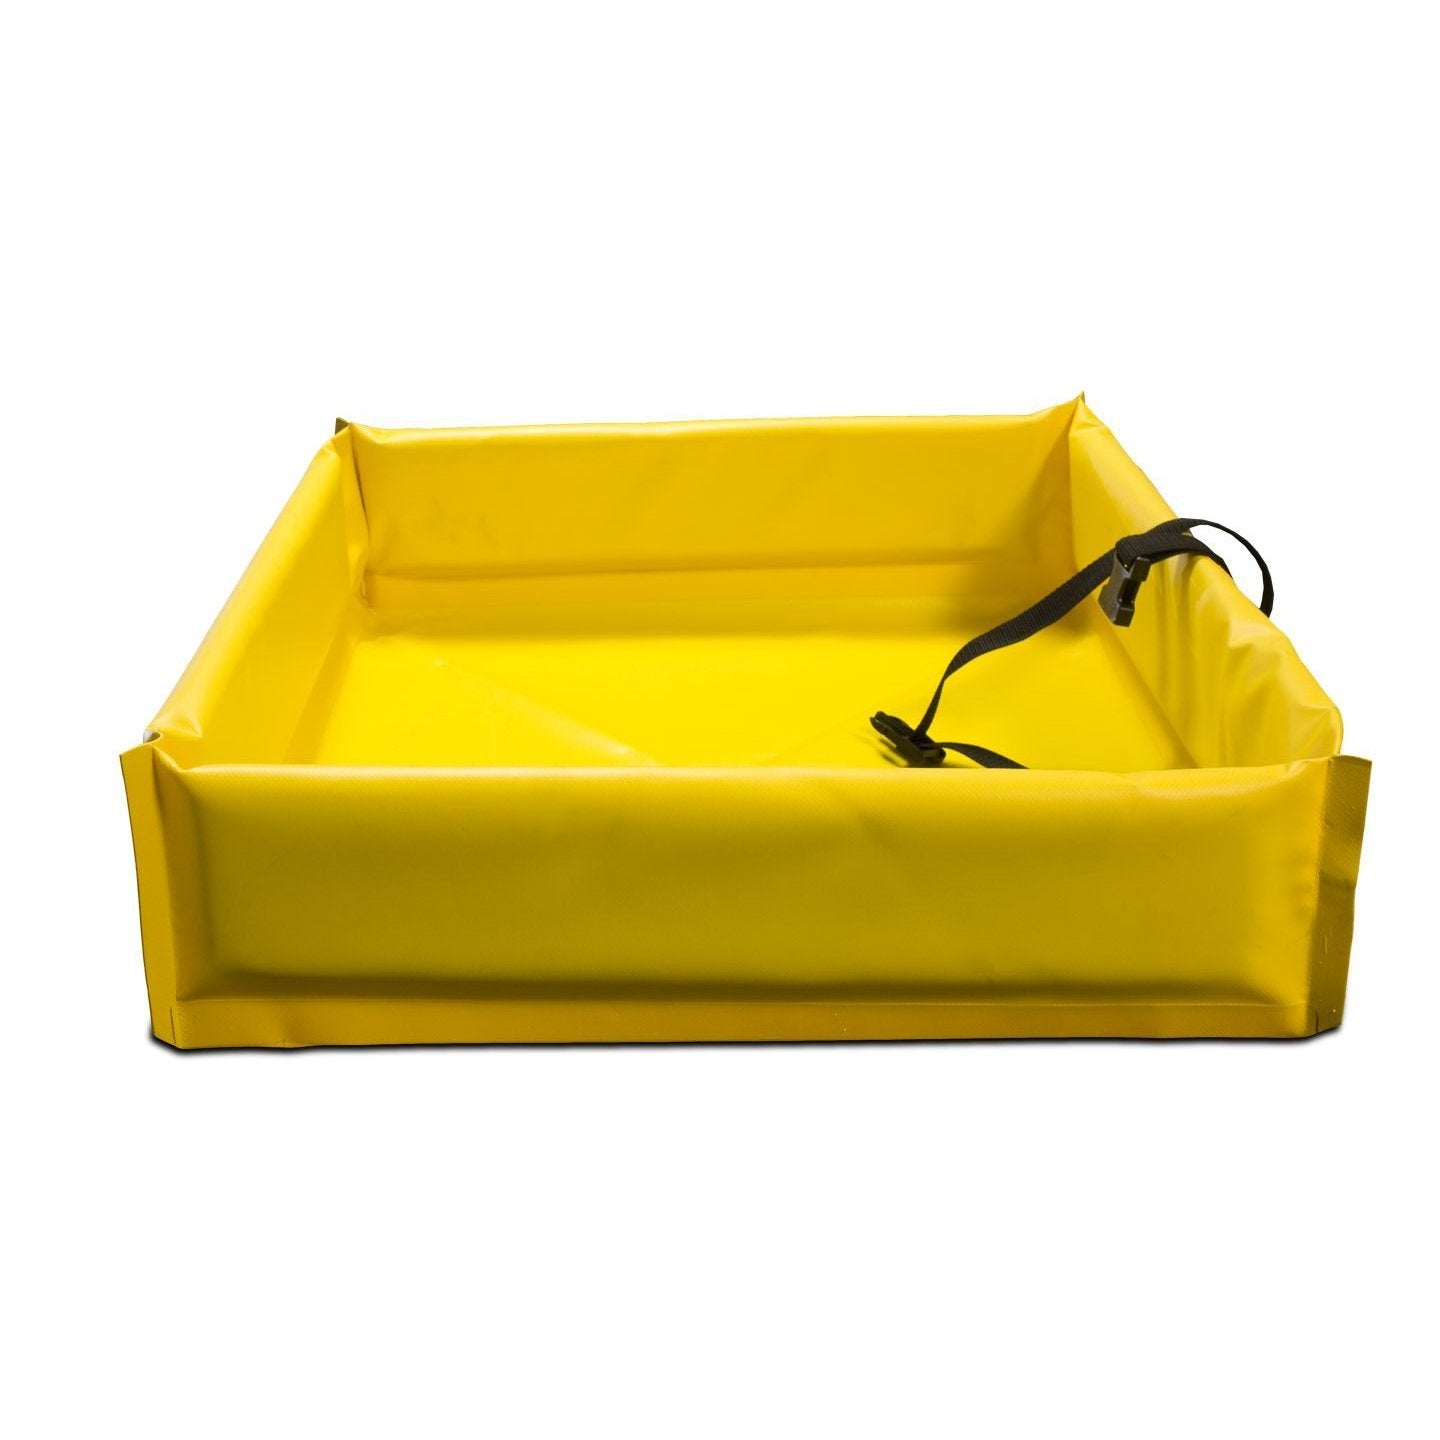 Portable Spill Containment Berms - 15 gal